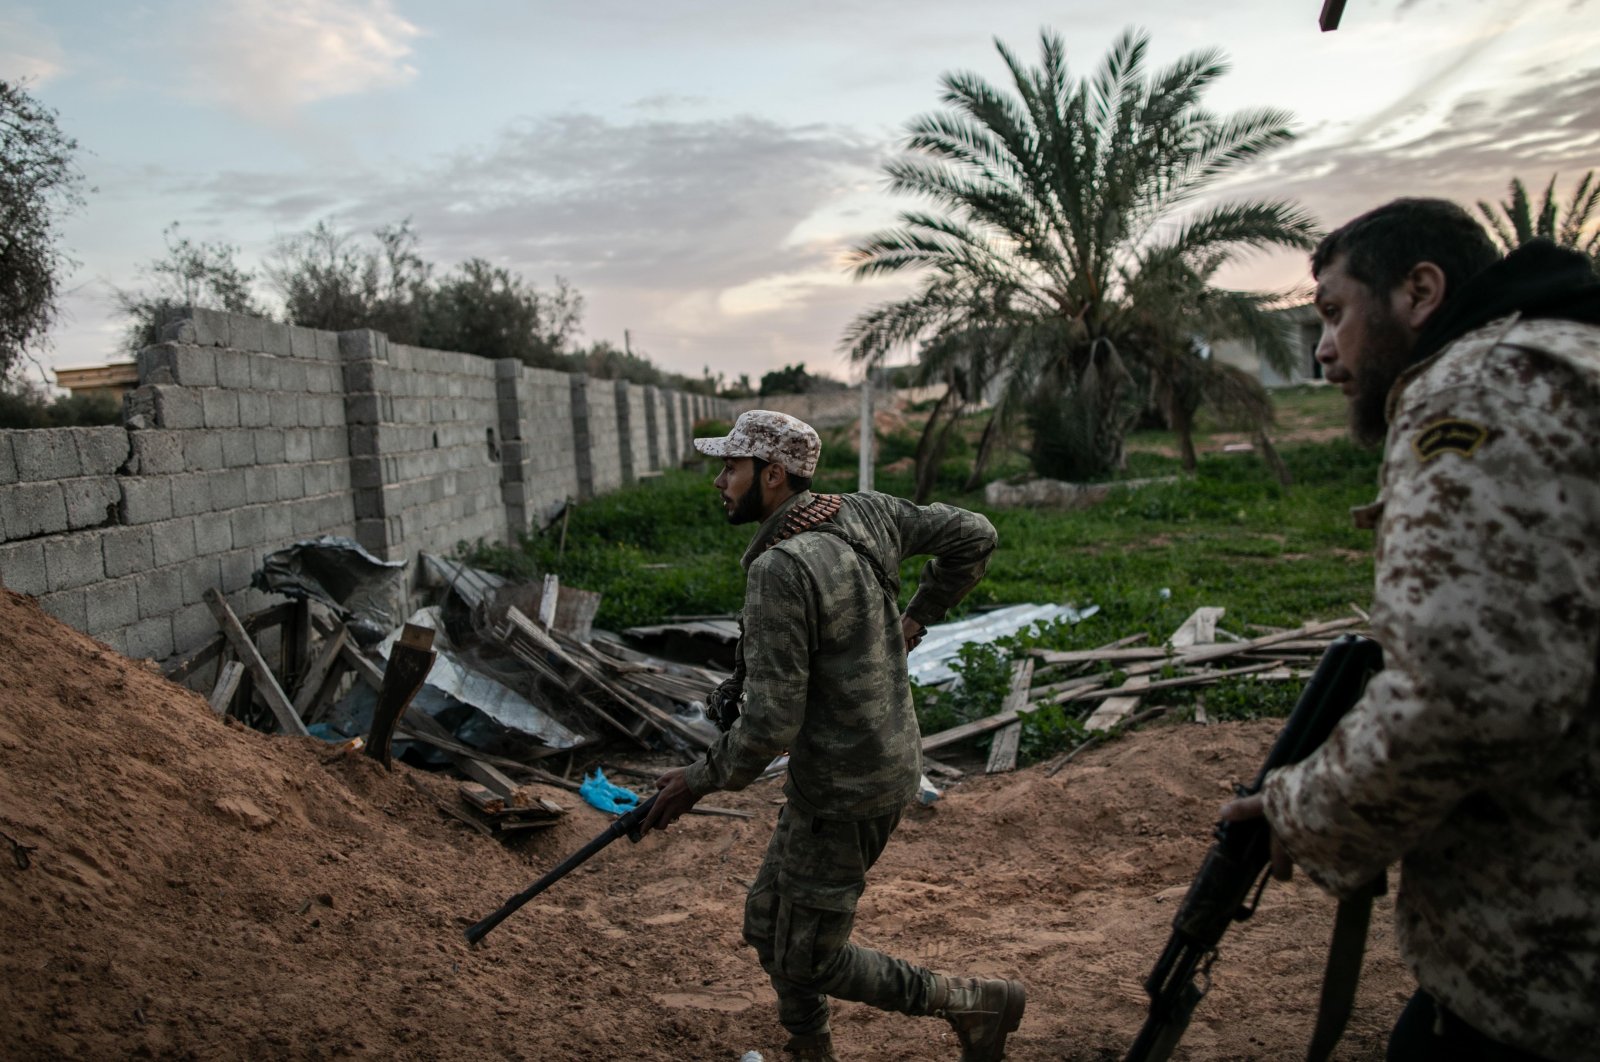 Fighters of the U.N.-backed National Agreement Government (GNA) during clashes with the eastern-based army on the Sawani front line in Tripoli, Libya, 12 Feb. 2020. (Reuters File Photo)